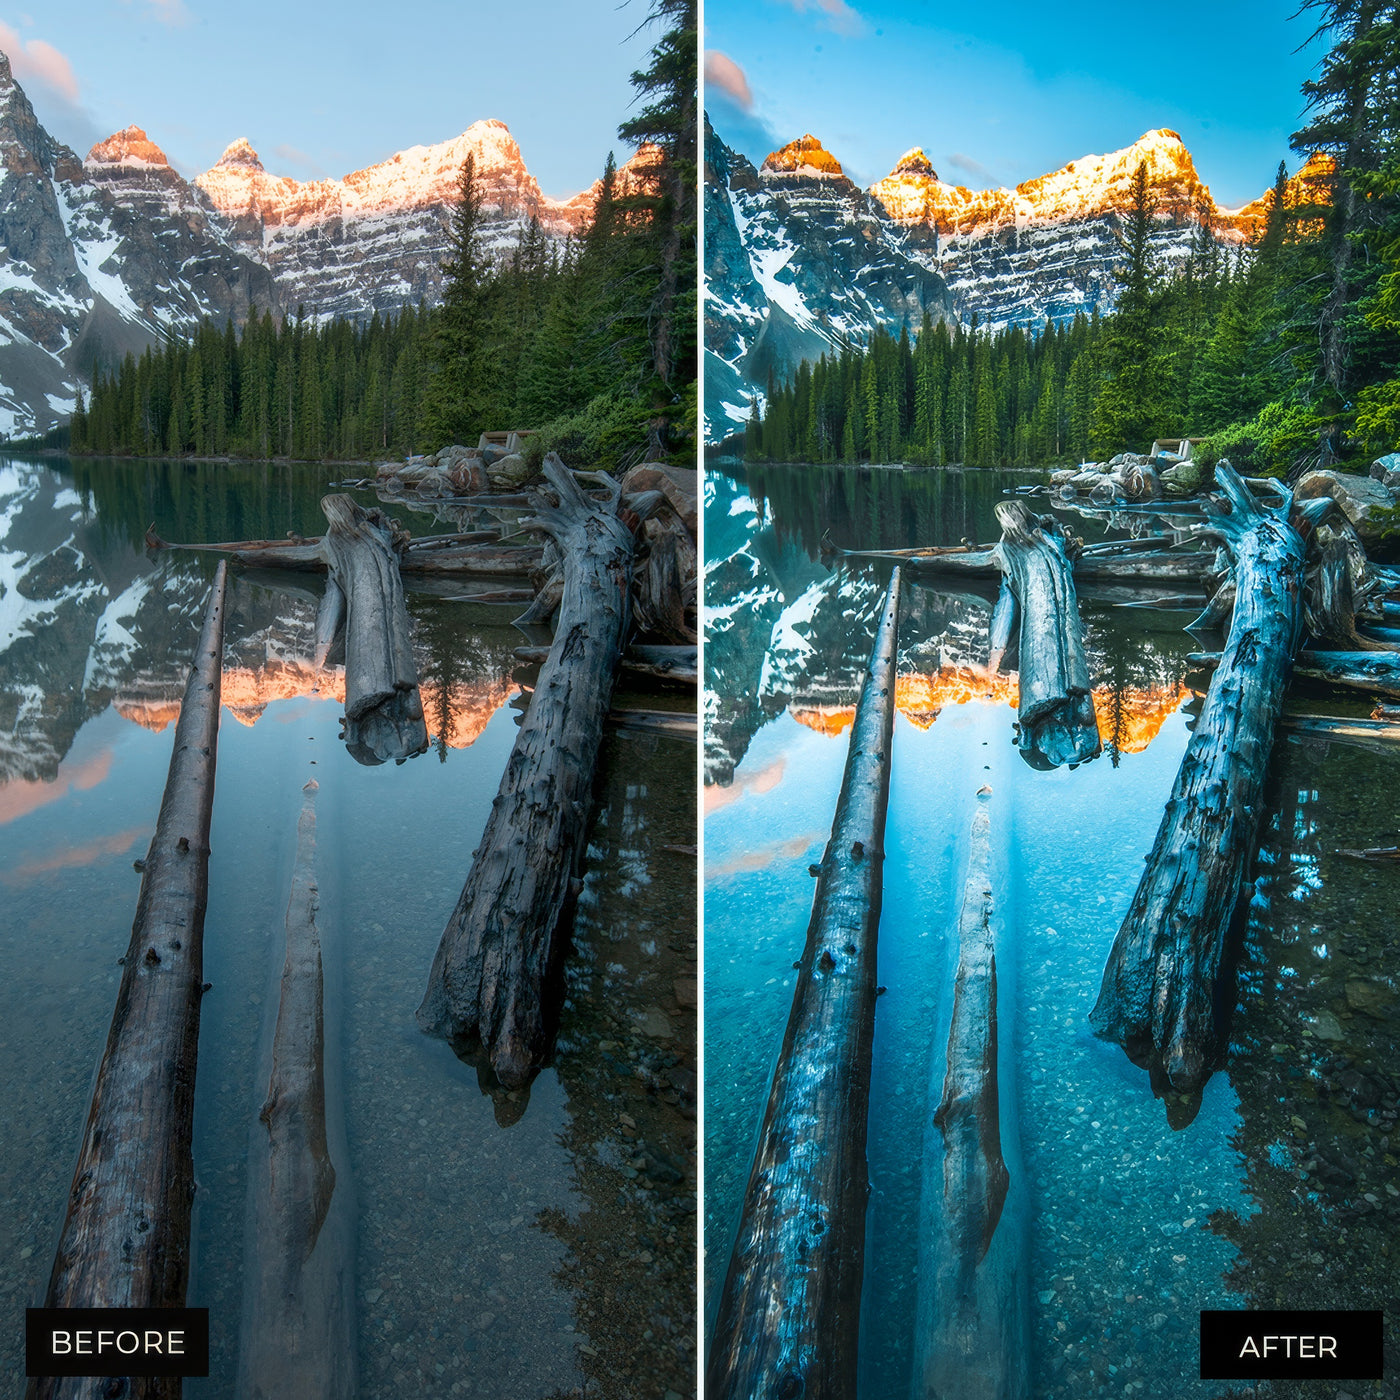 presets to enhance landscapes. The presets can help you enhance